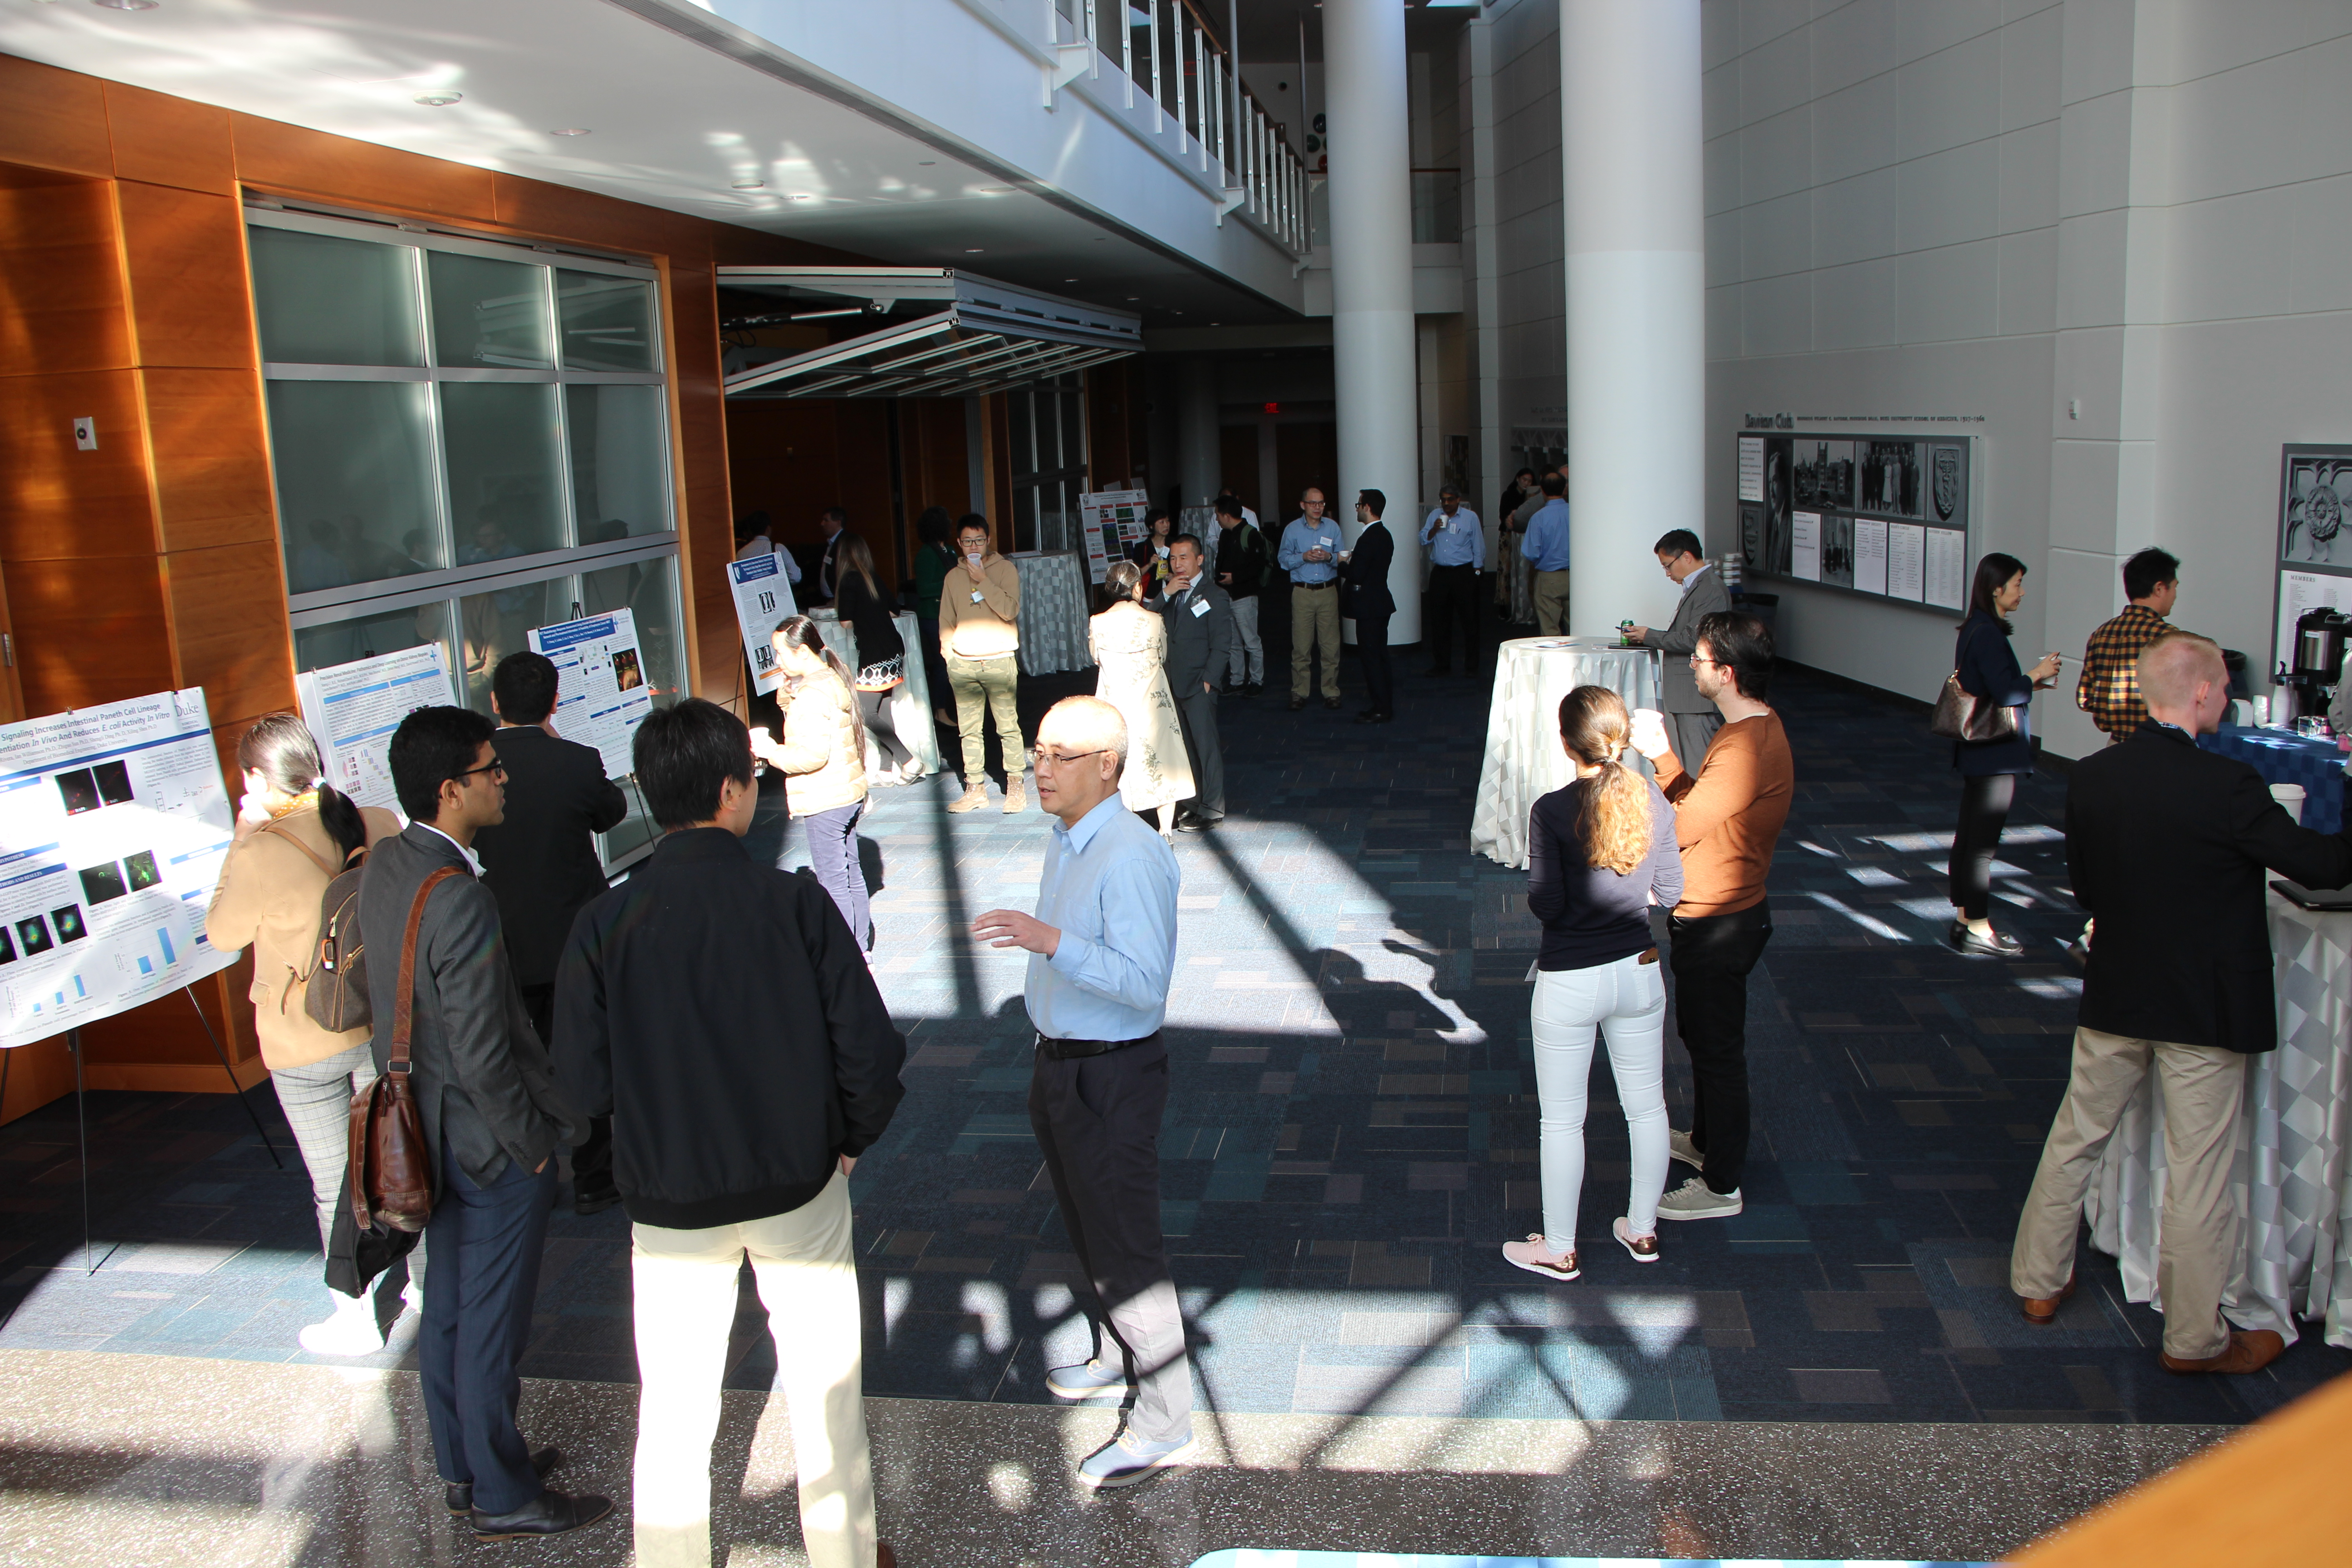 The crowd chats and explores the posters during a break at the DAP symposium